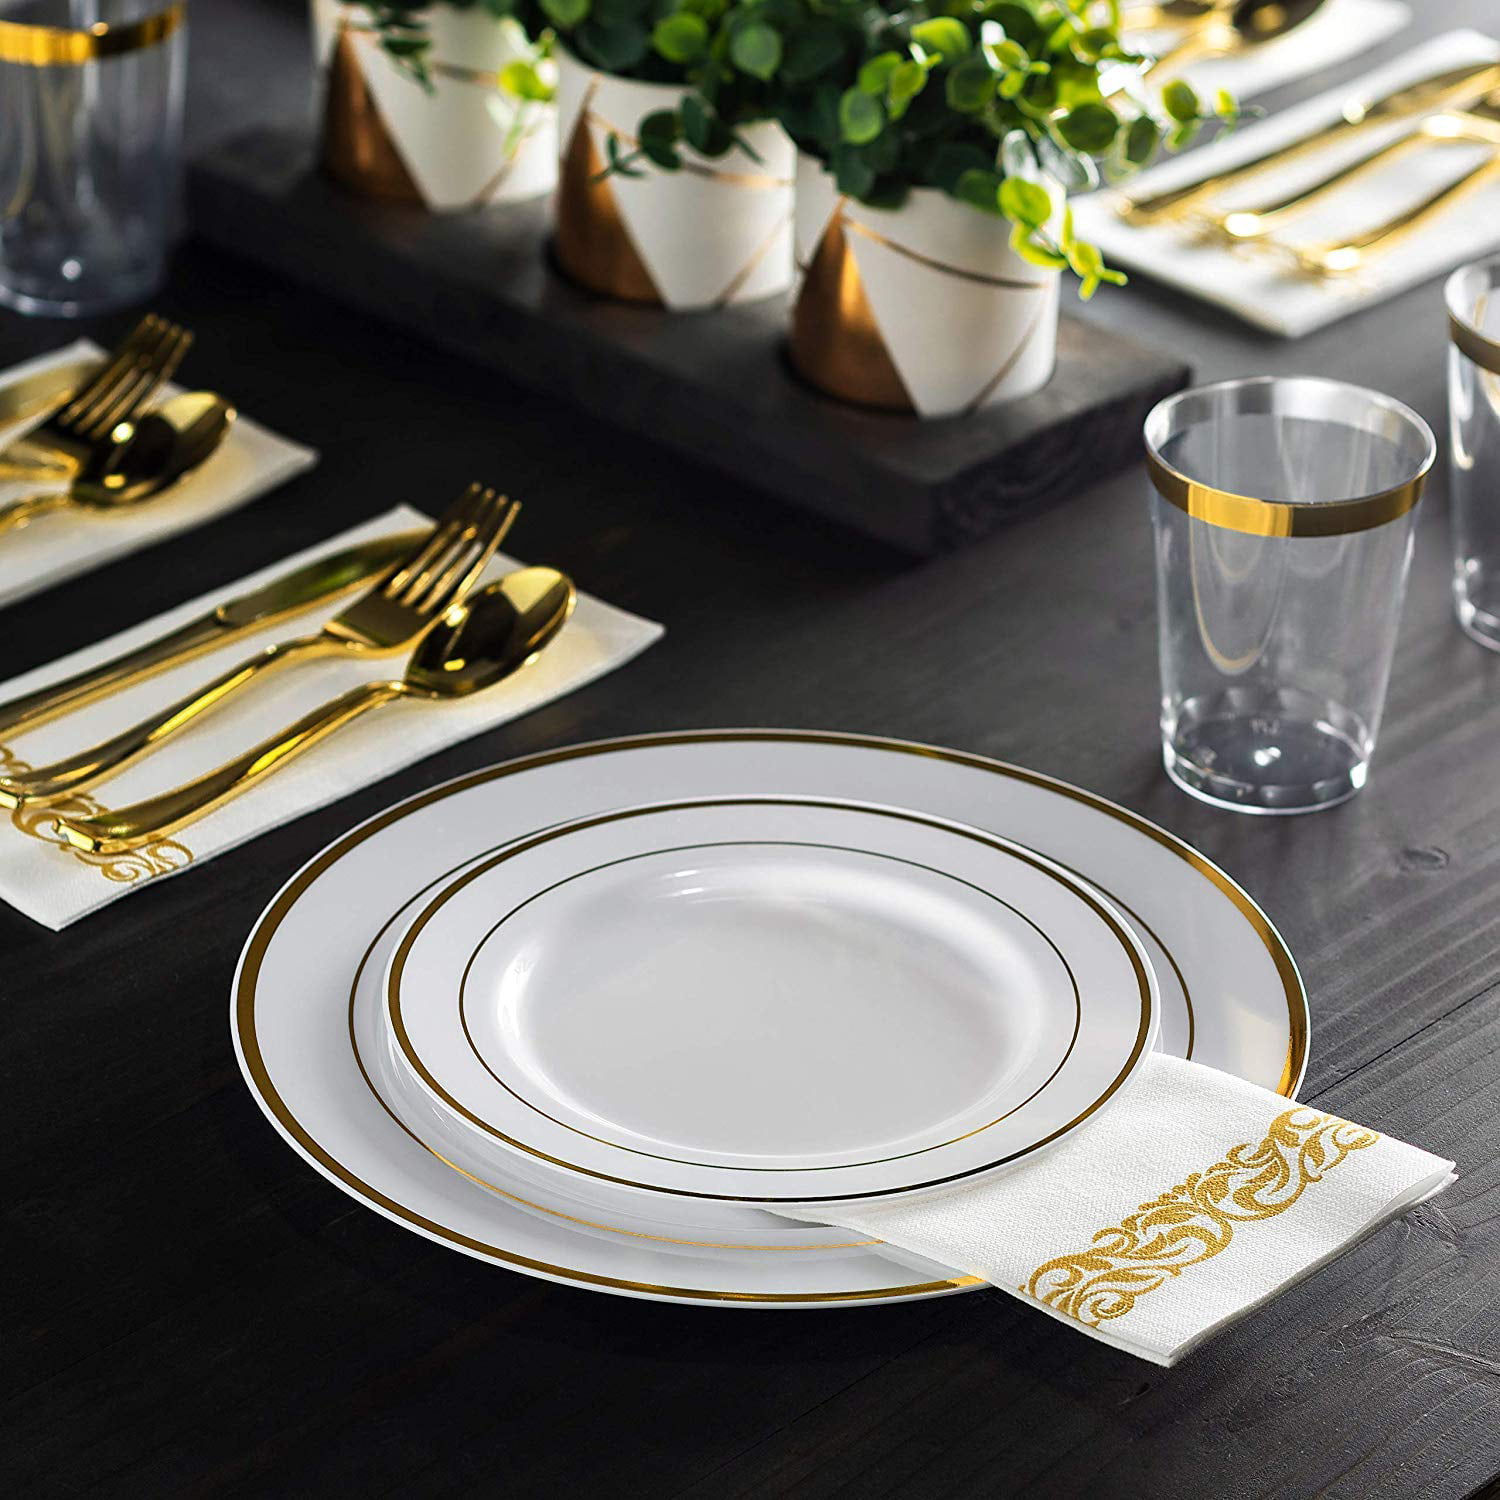 Birthday，Party Catering Event Supernal 400pcs Gold Plastic Dinnerware Set， Gold Plastic Plates，Gold Plastic Silverware， Plastic Cups with Gold Rim，Gold Napkins， Service for 50 Guest，Suit for Wedding 